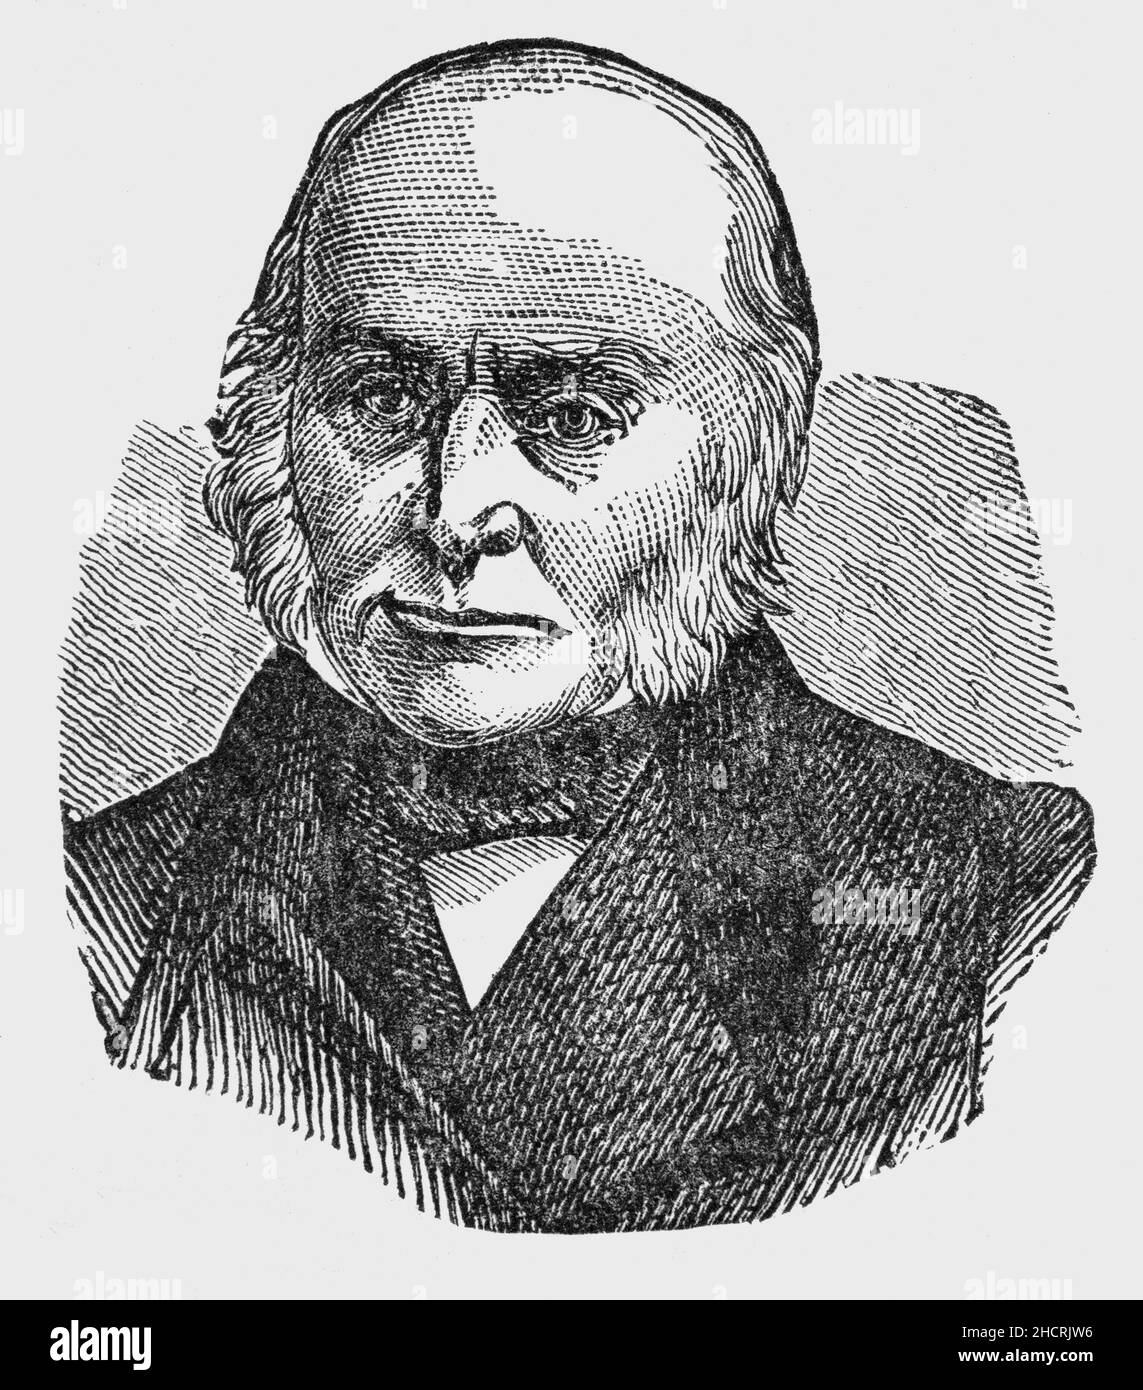 A late 19th Century portrait of John Quincy Adams (1767-1848), American statesman, diplomat, lawyer, and diarist, who served as the 6th president of the United States from 1825 to 1829. He previously served as the 8th United States Secretary of State from 1817 to 1825. During his long diplomatic and political career, Adams also served as an ambassador, and as a member of the United States Senate and House of Representatives representing Massachusetts. He won election to the presidency as a member of the Democratic-Republican Party, and in the mid-1830s became affiliated with the Whig Party. Stock Photo